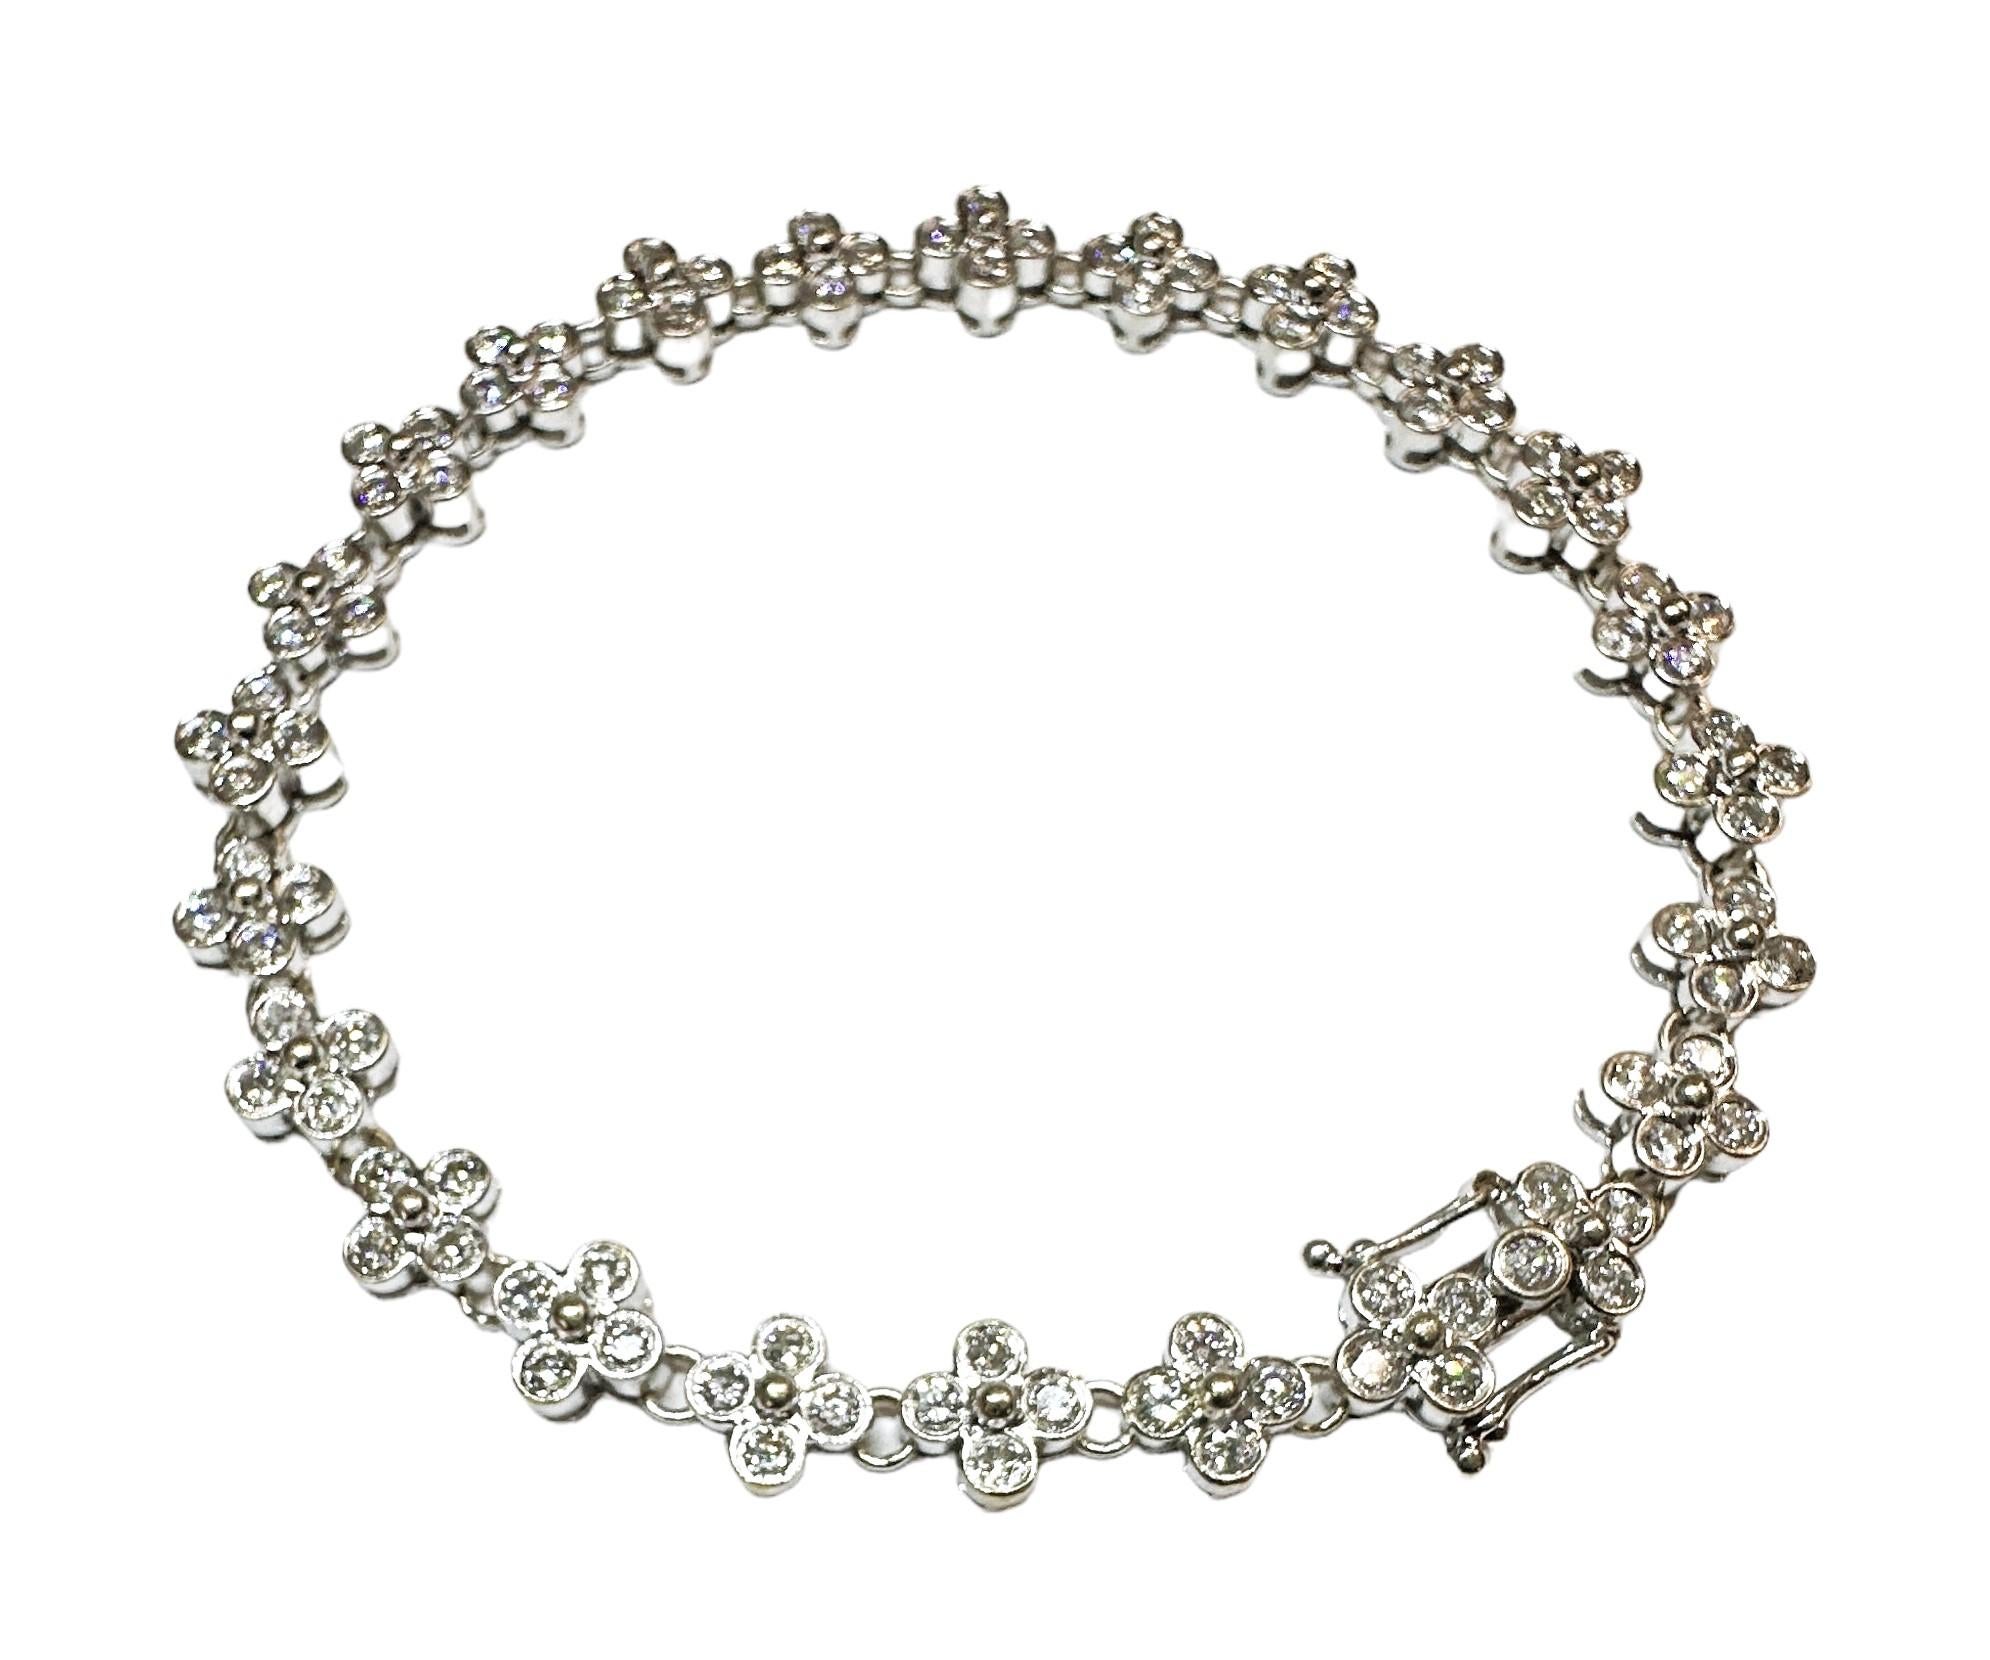 This bracelet has just a fabulous design!!  It is pre-owned and in excellent condition.    It is stamped 